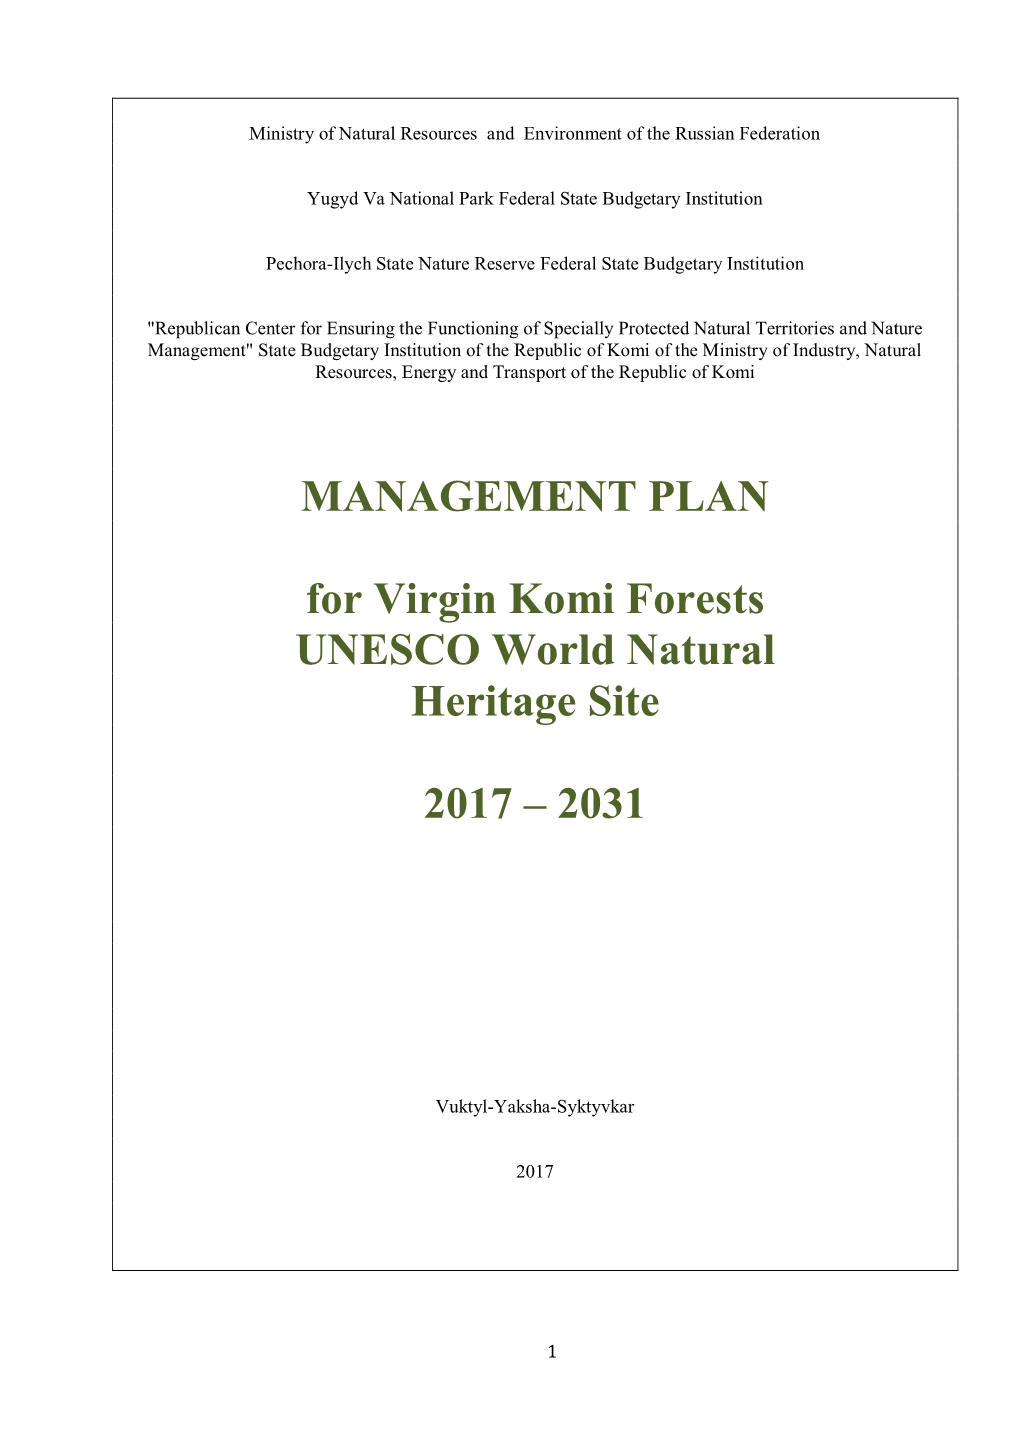 Management Plan for Virgin Komi Forests UNESCO Site; First of All, They Are Employees of Yugyd Va National Park and Pechora-Ilych State Nature Reserve Fsbis